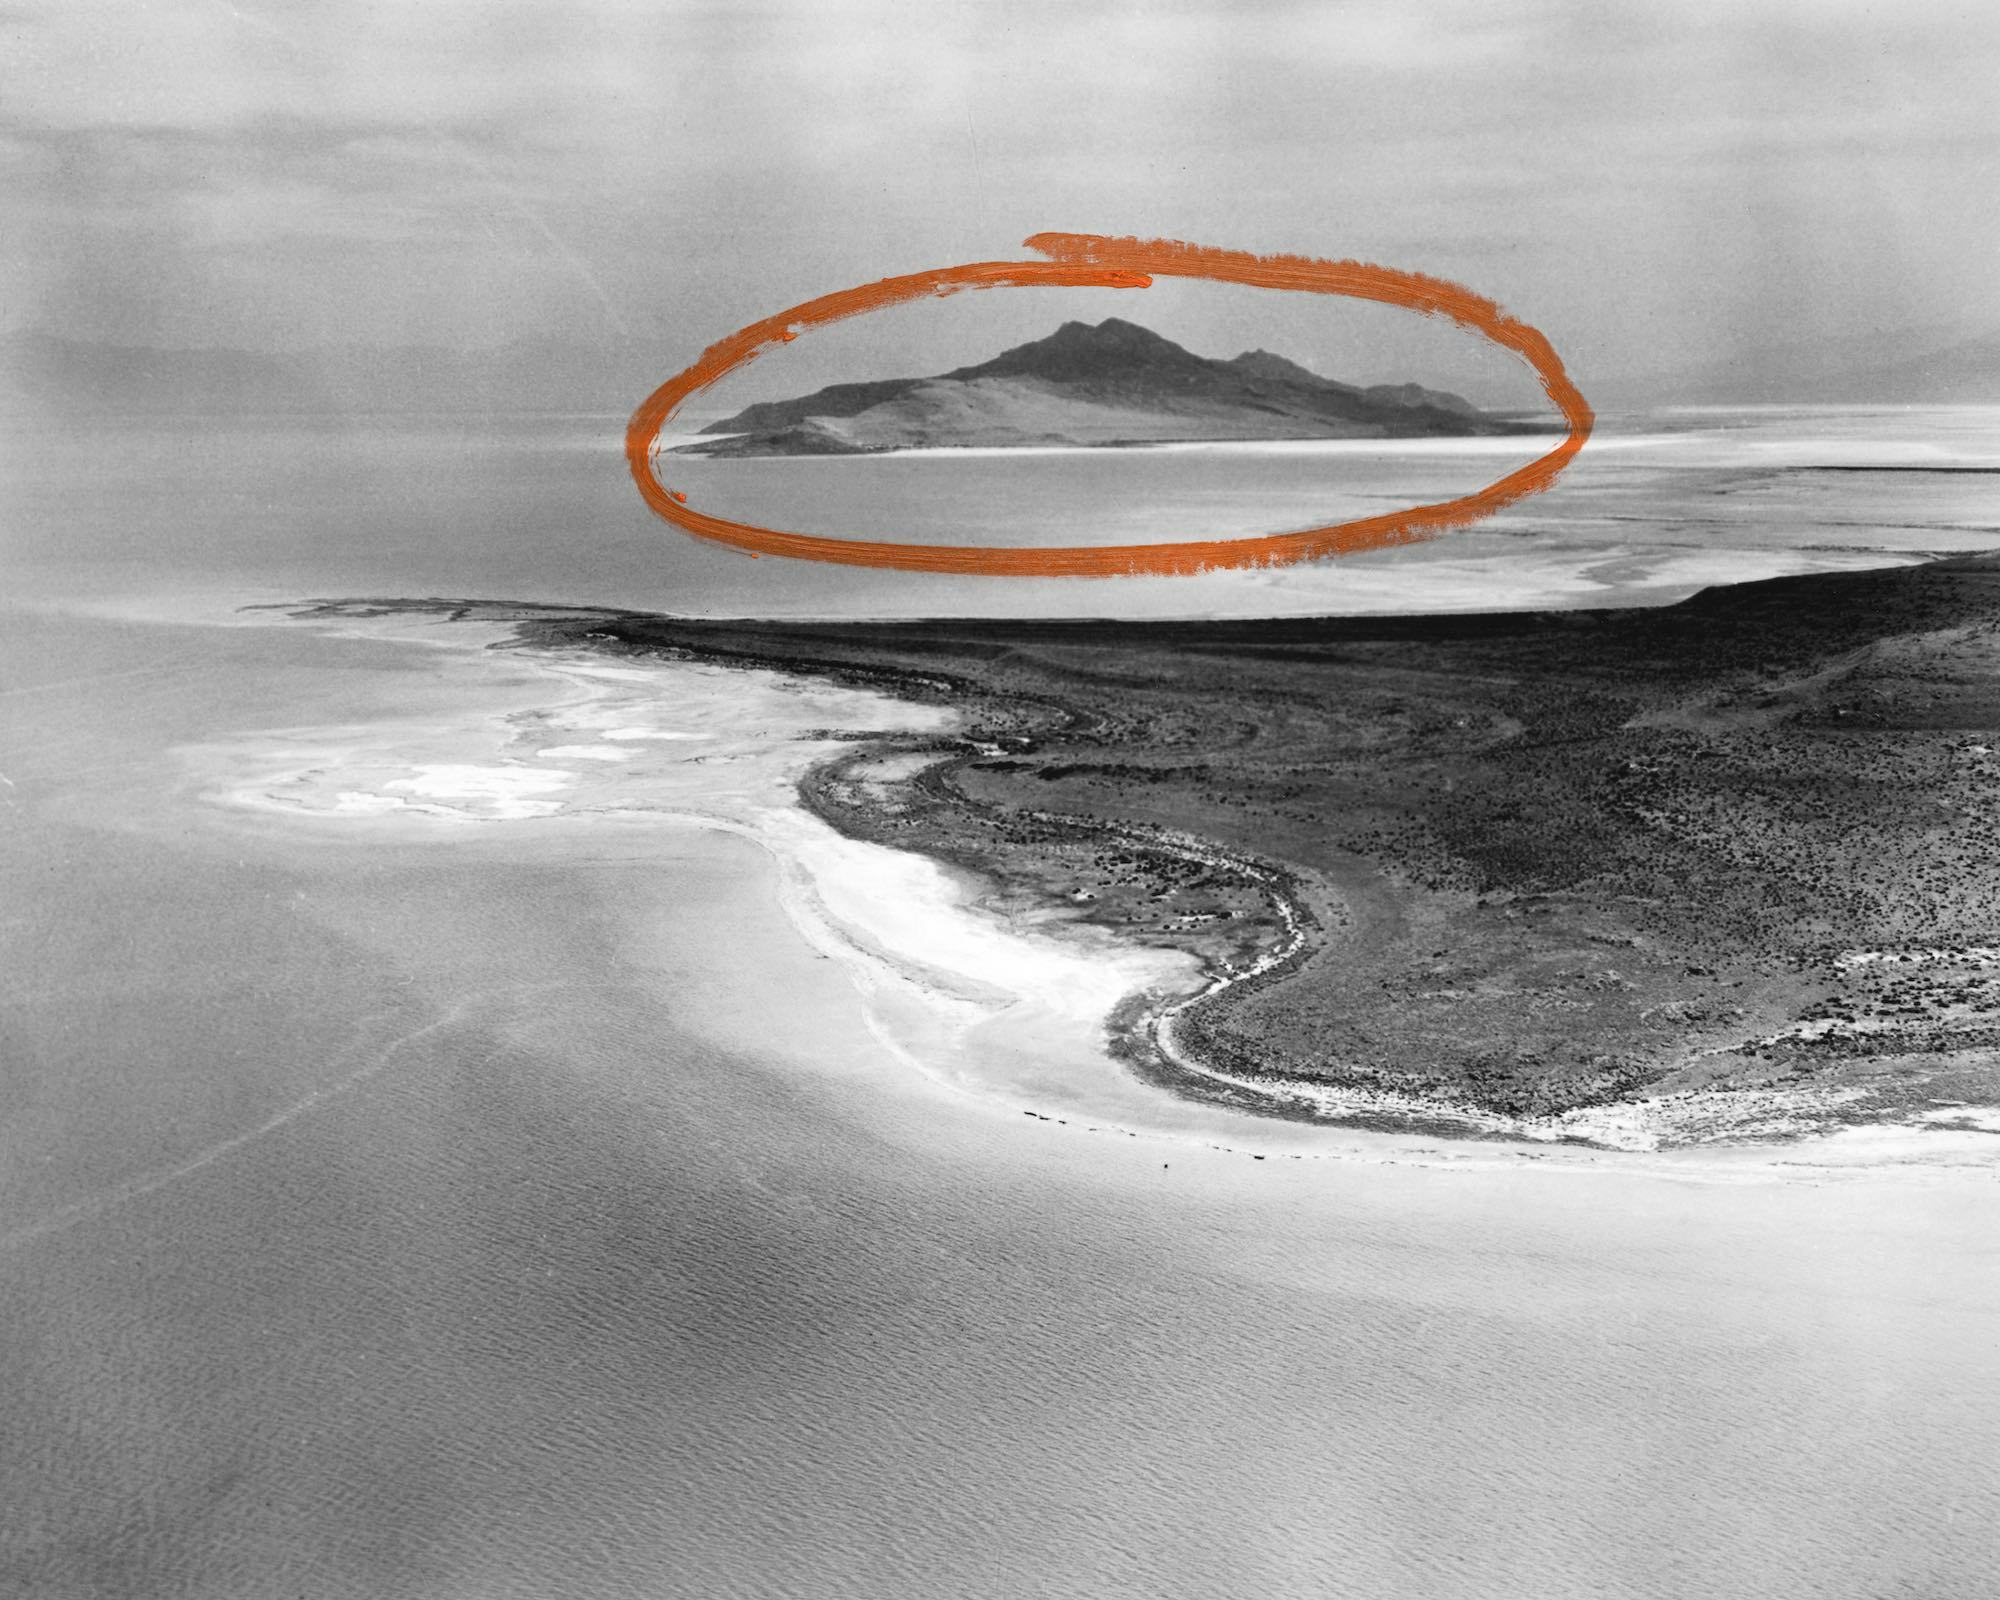 Archival aerial image of Stansbury Island in the Great Salt Lake (Utah), with two arrows in red paint drawn on top. © Jaclyn Wright